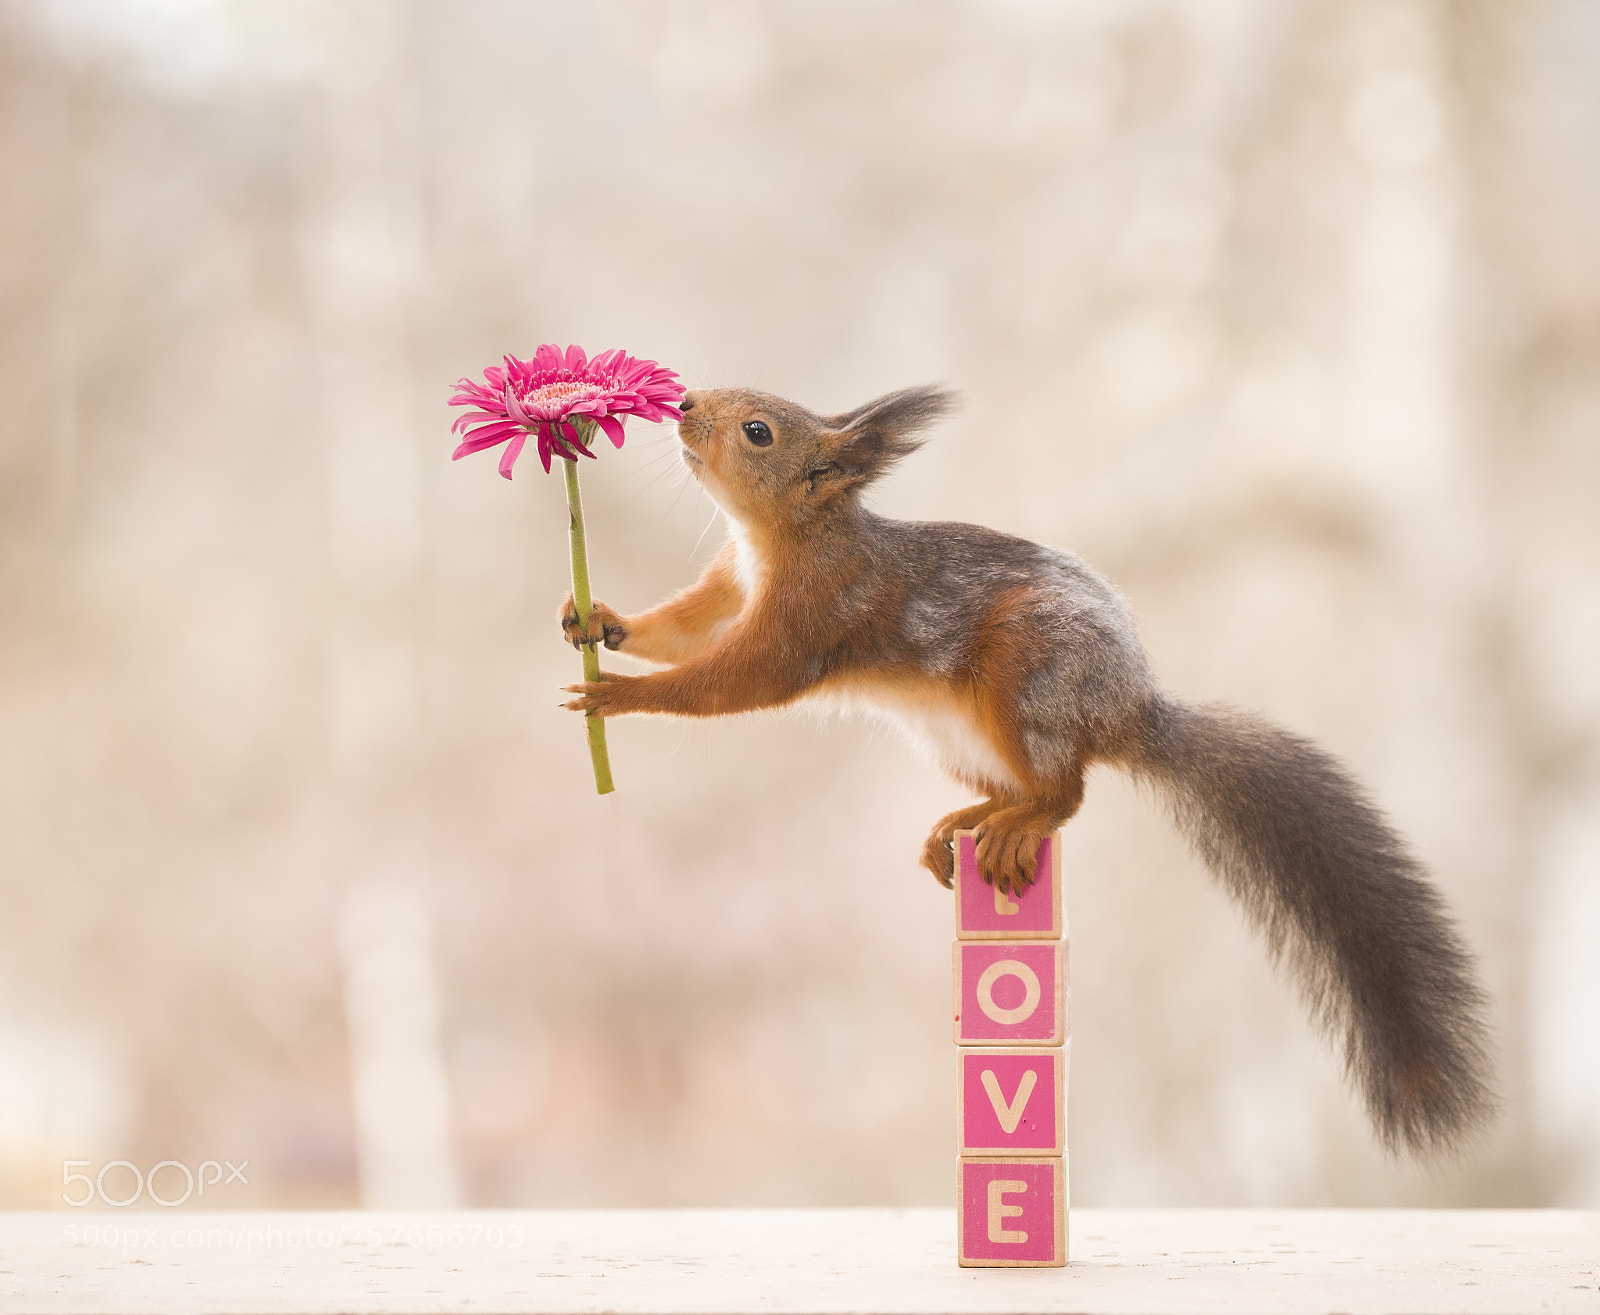 Nikon D810 sample photo. Red squirrel on love photography